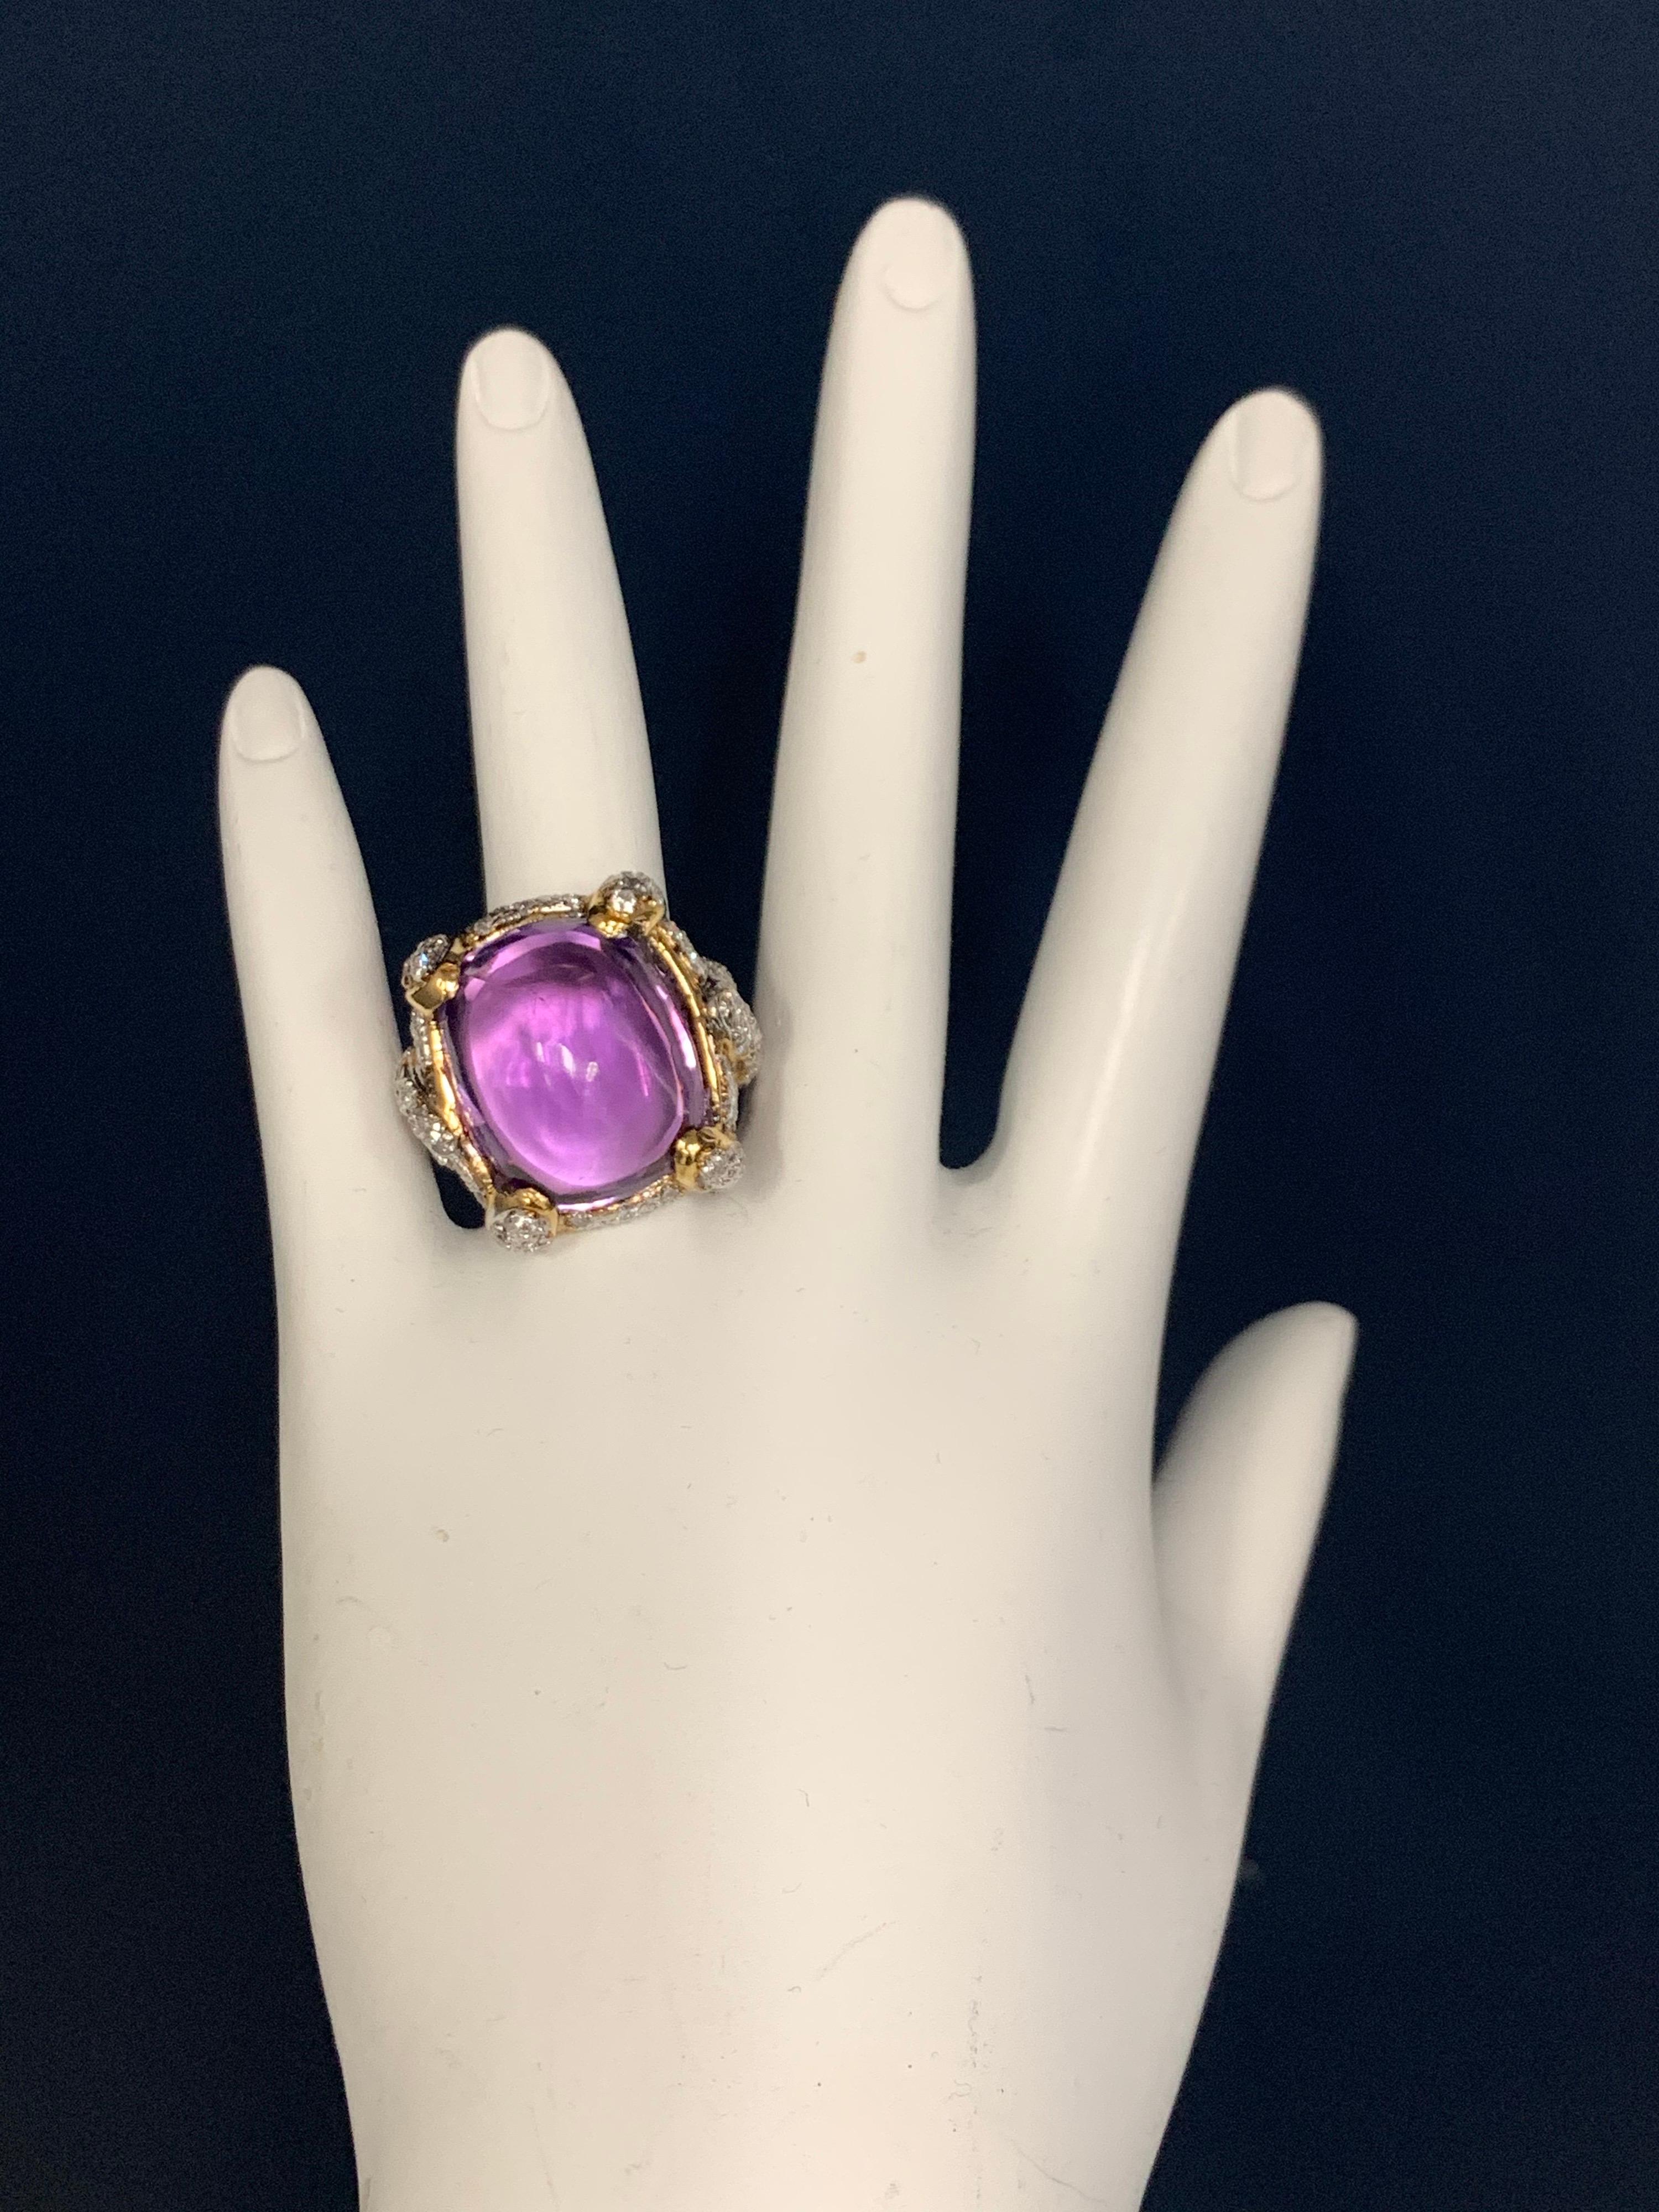 21.68 Carat Retro Gold Cocktail Ring Natural Diamond and Cab Amethyst circa 1960 In Good Condition For Sale In Los Angeles, CA